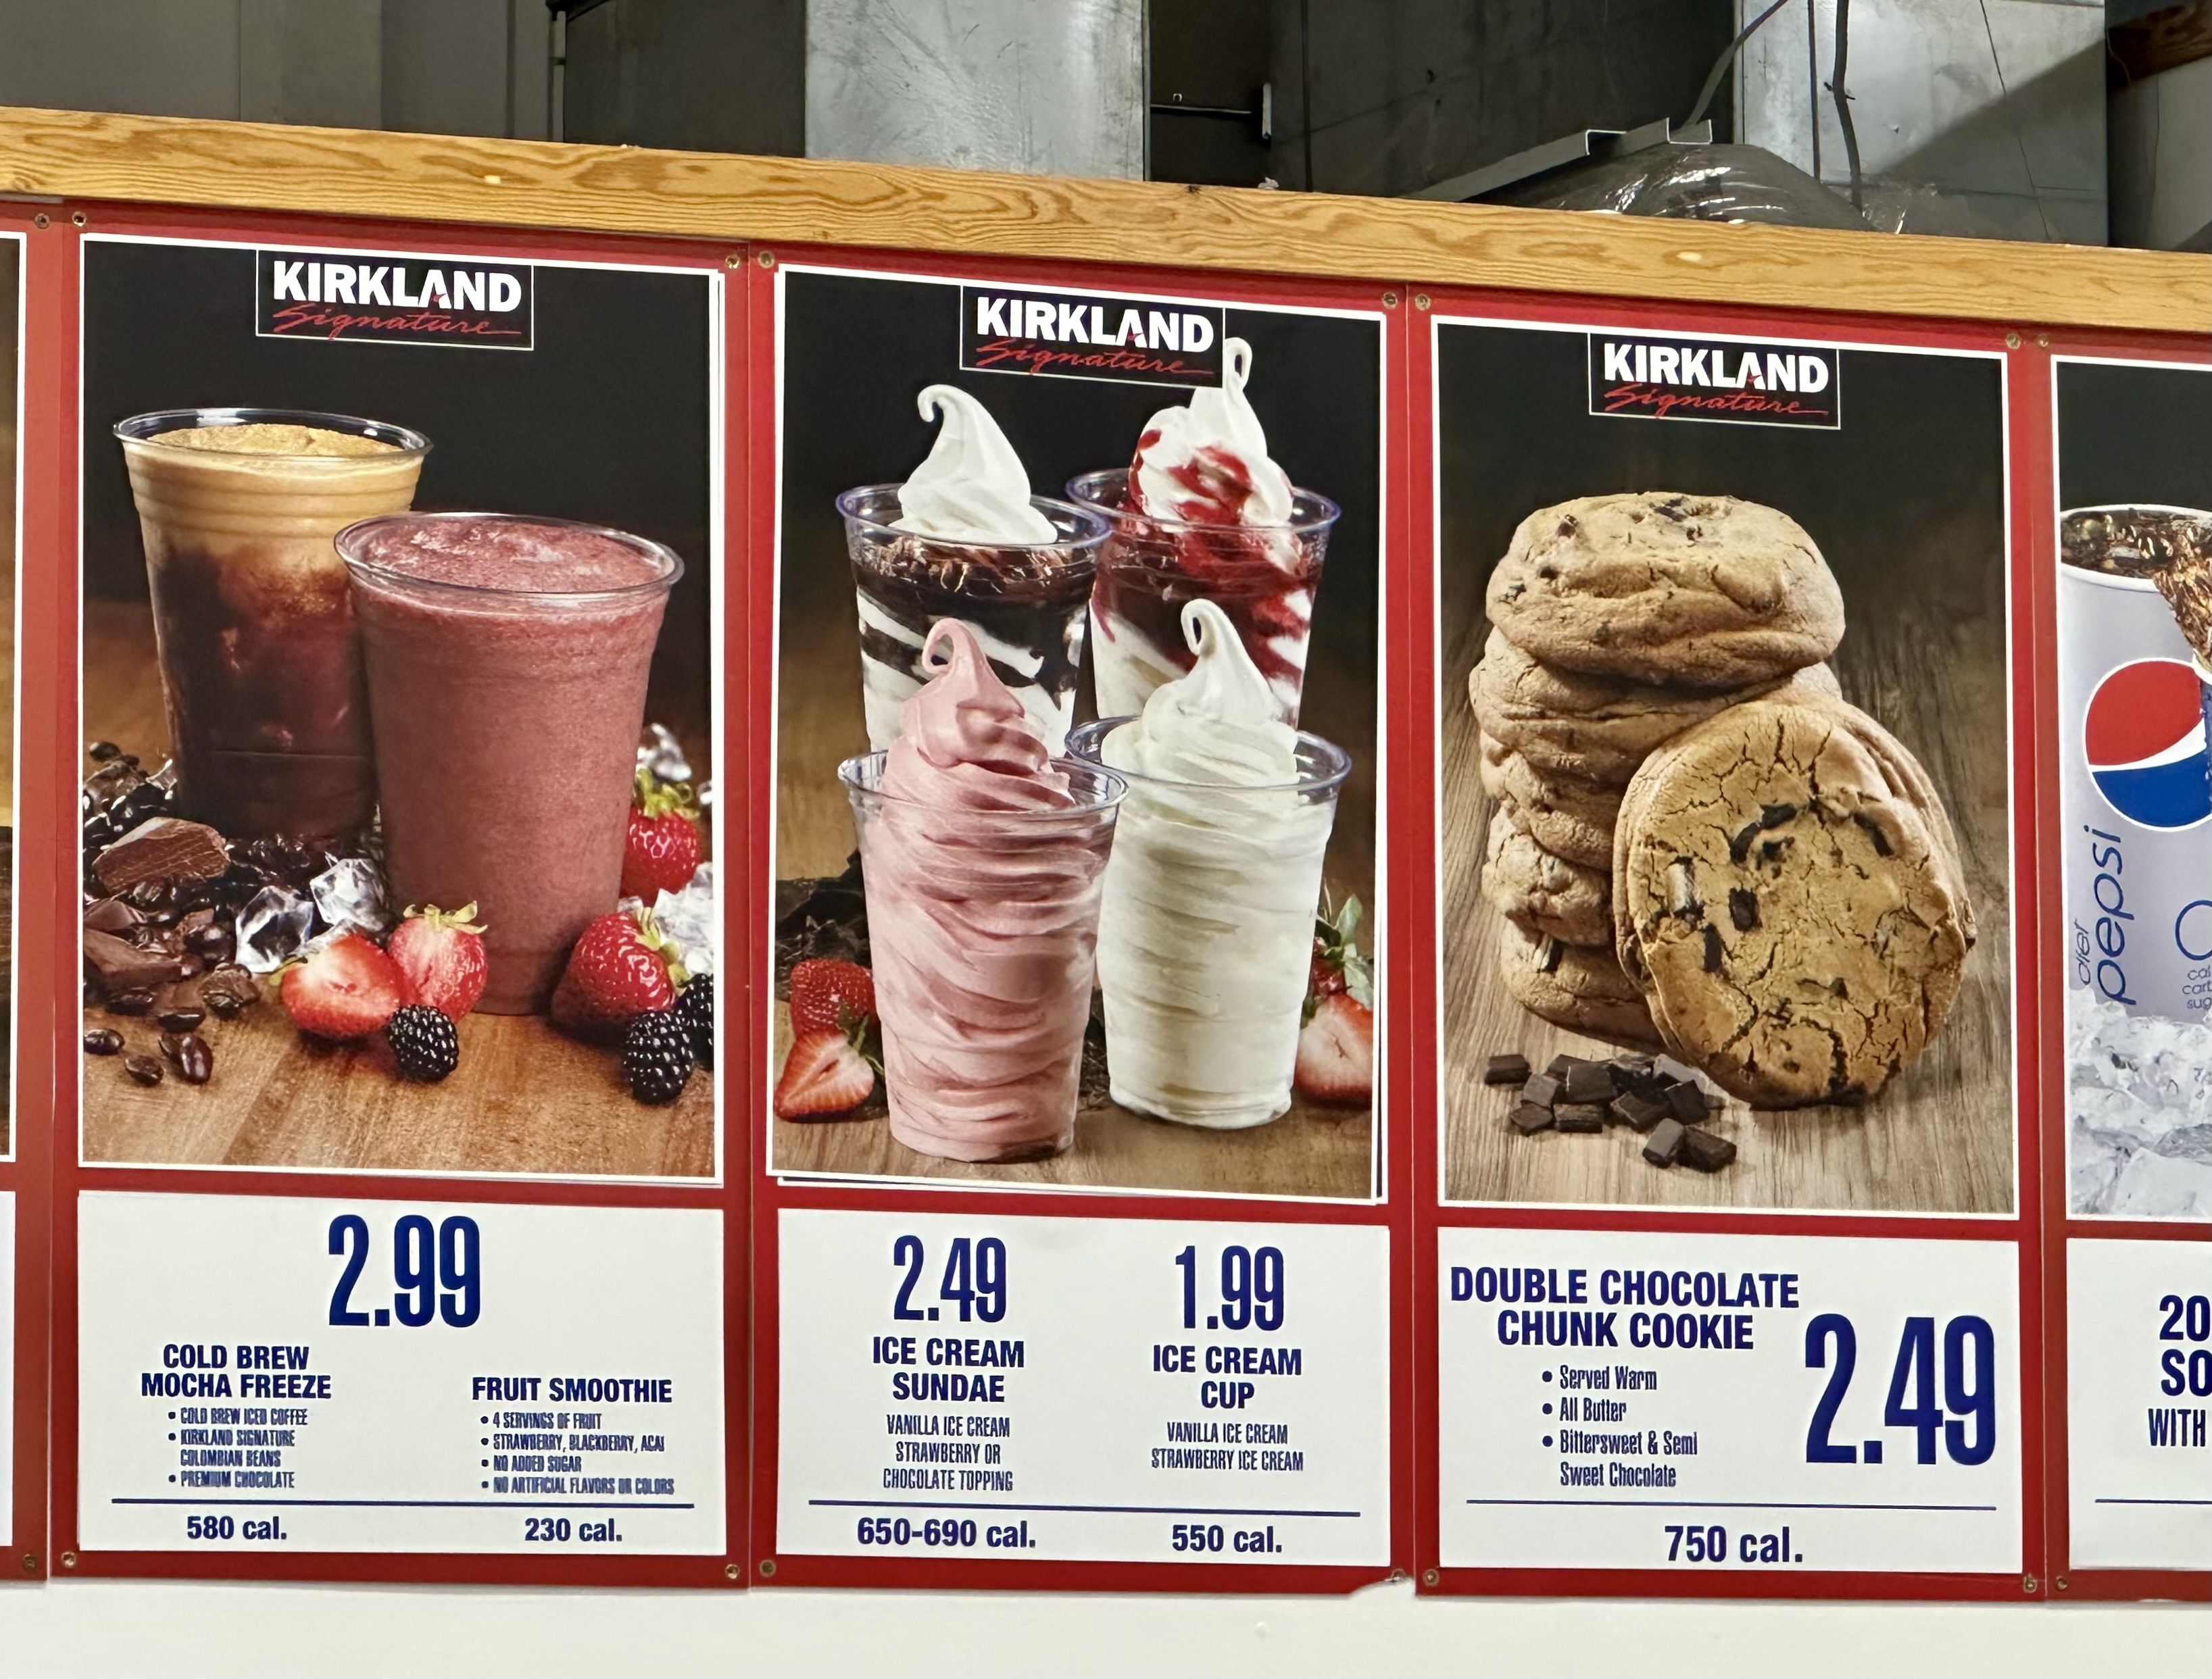 Costco cookie with 750 calories replacing churro at club food courts